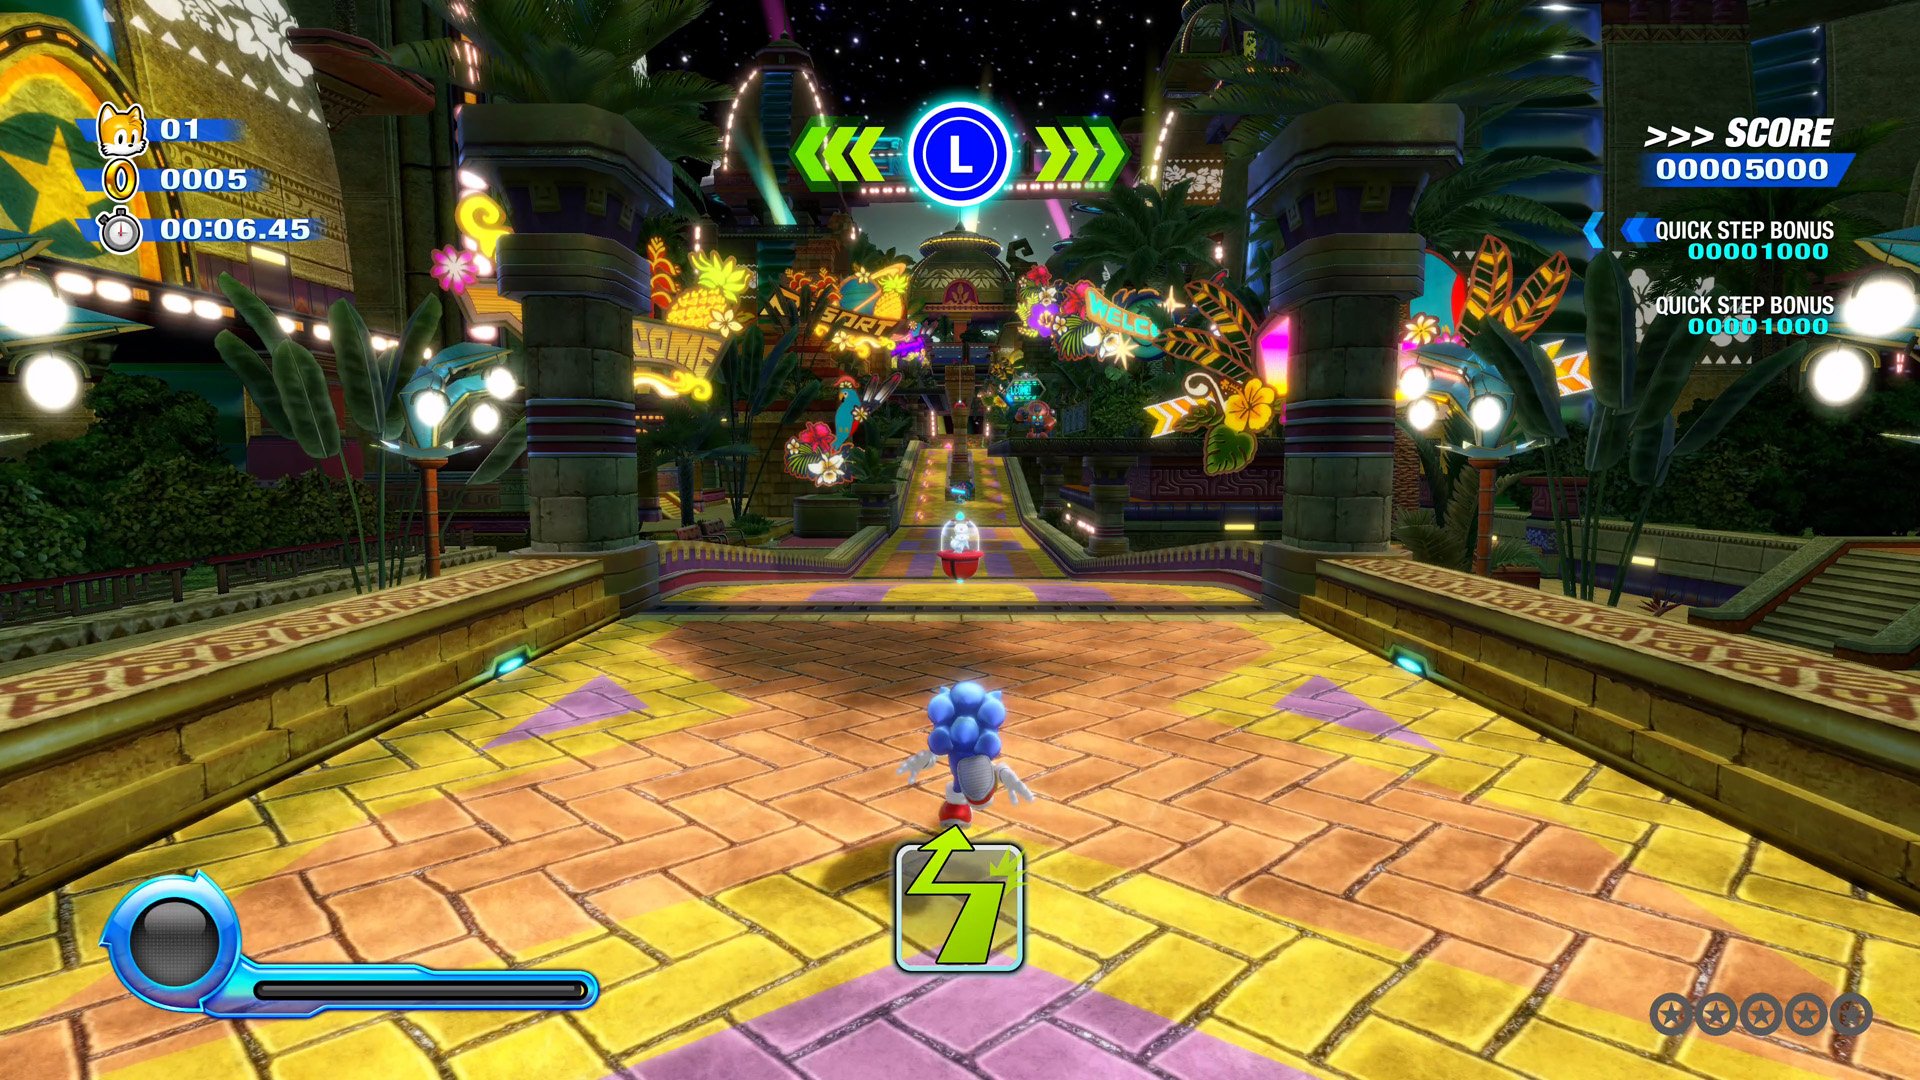 Sonic Colors Ultimate: The Hyper Sonic Playthrough 